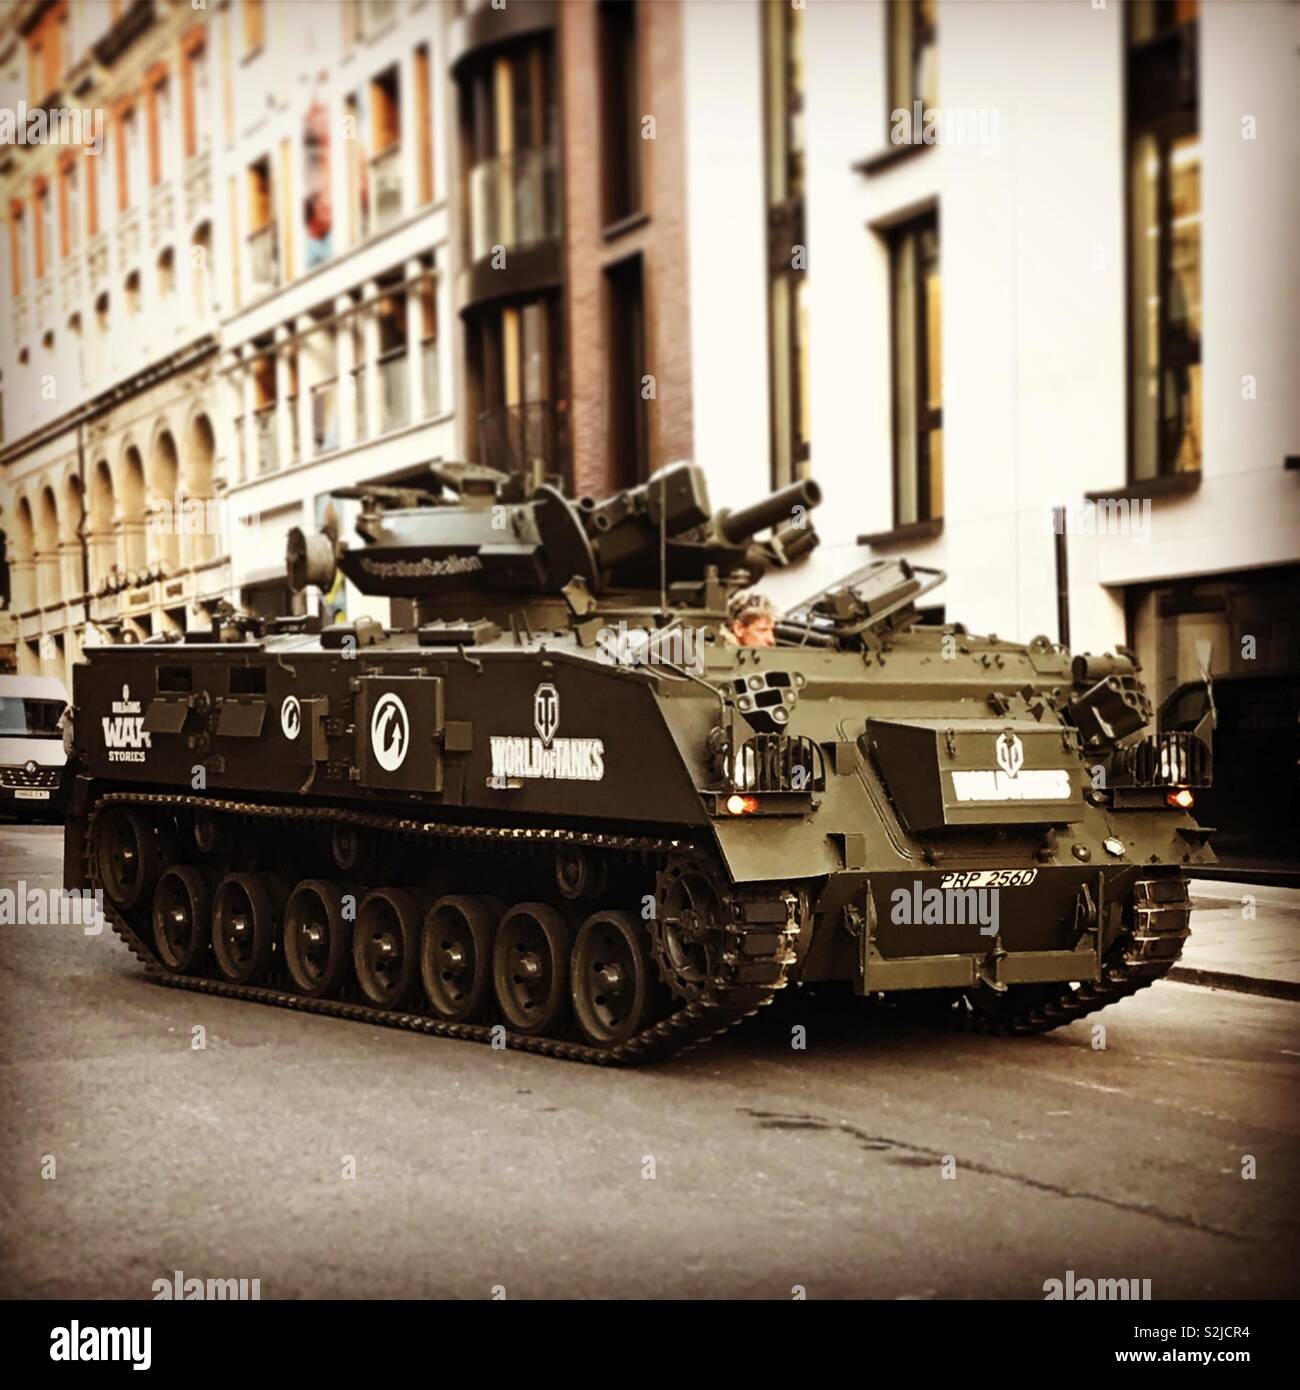 Real Tank in heart of London streets. Oxford Circus Stock Photo